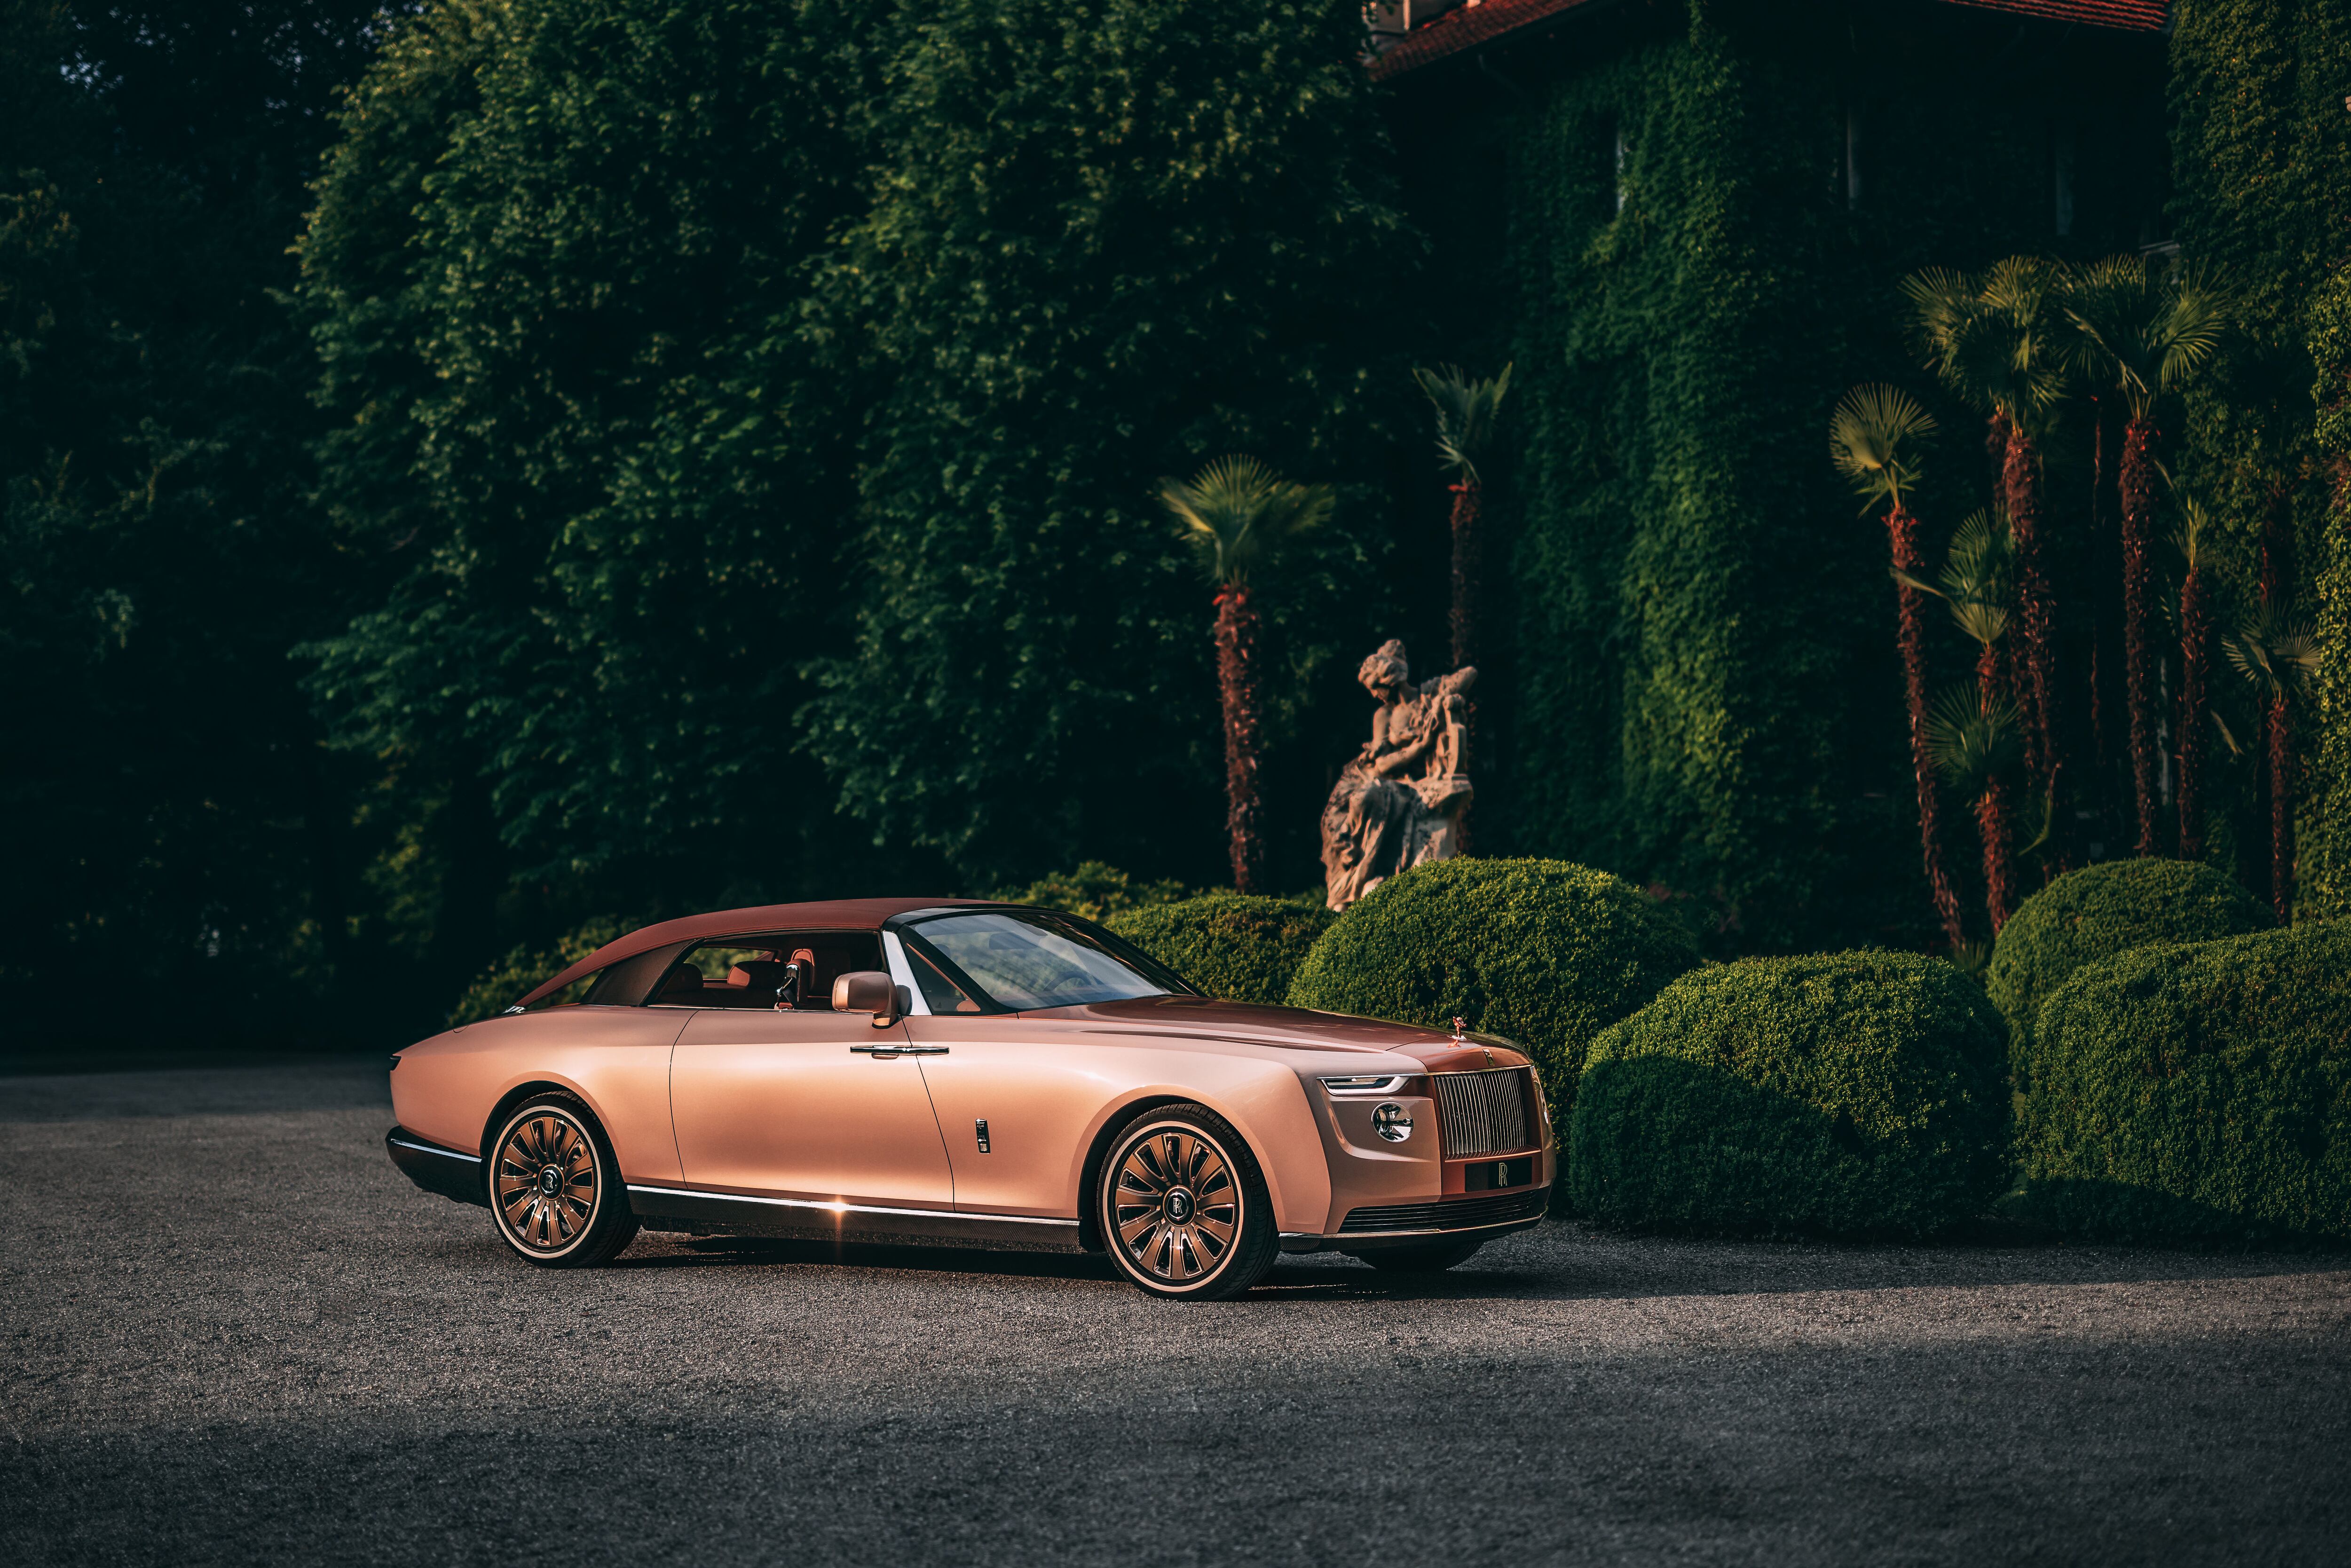 Haute Couture-inspired Rolls-Royce Phantom one-off revealed